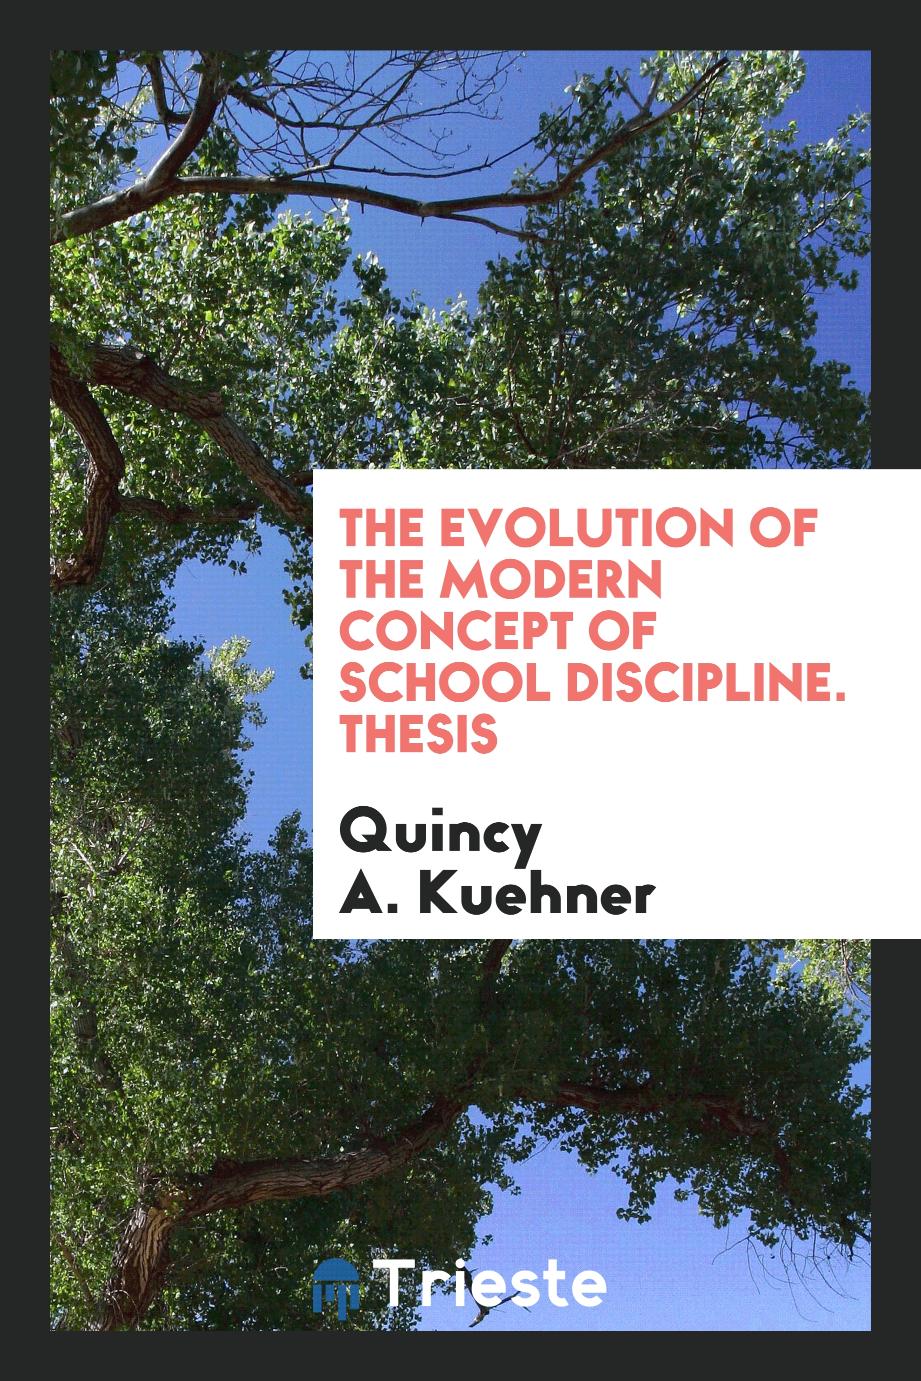 The Evolution of the Modern Concept of School Discipline. Thesis